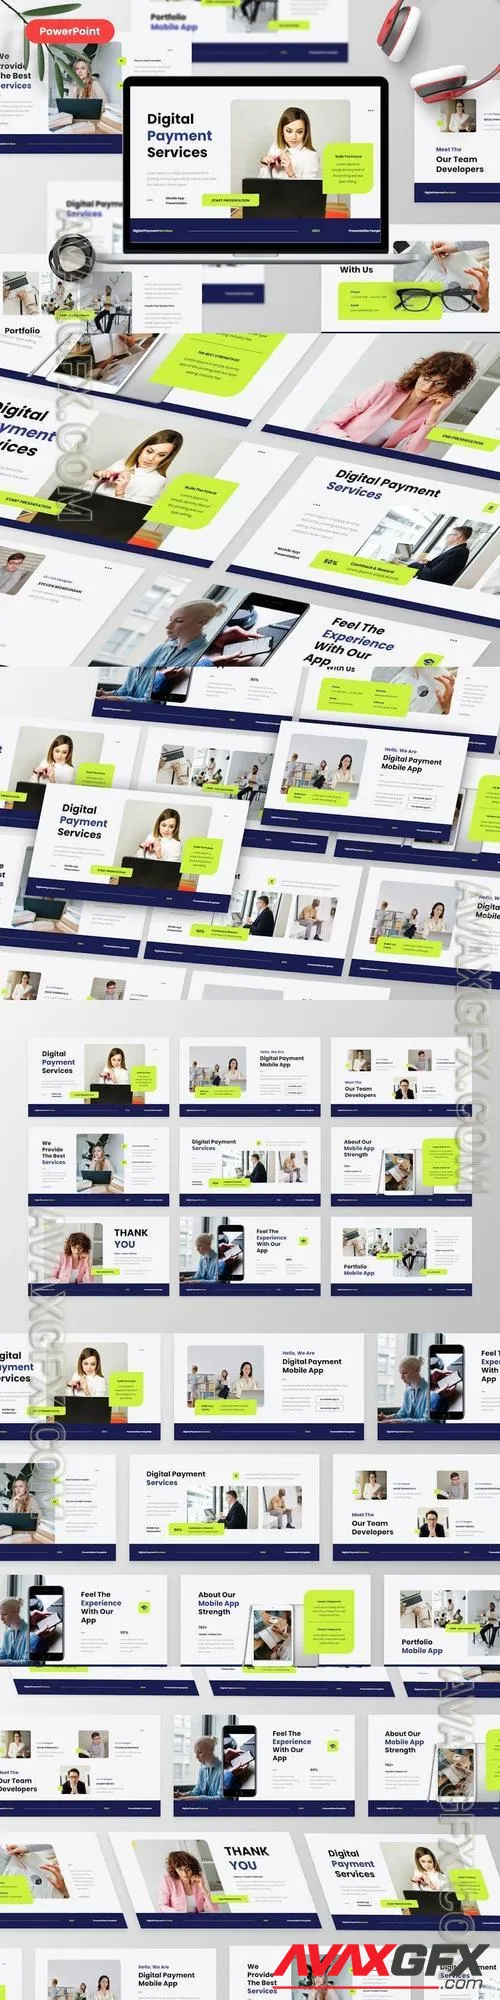 Digis - Mobile App PowerPoint Template